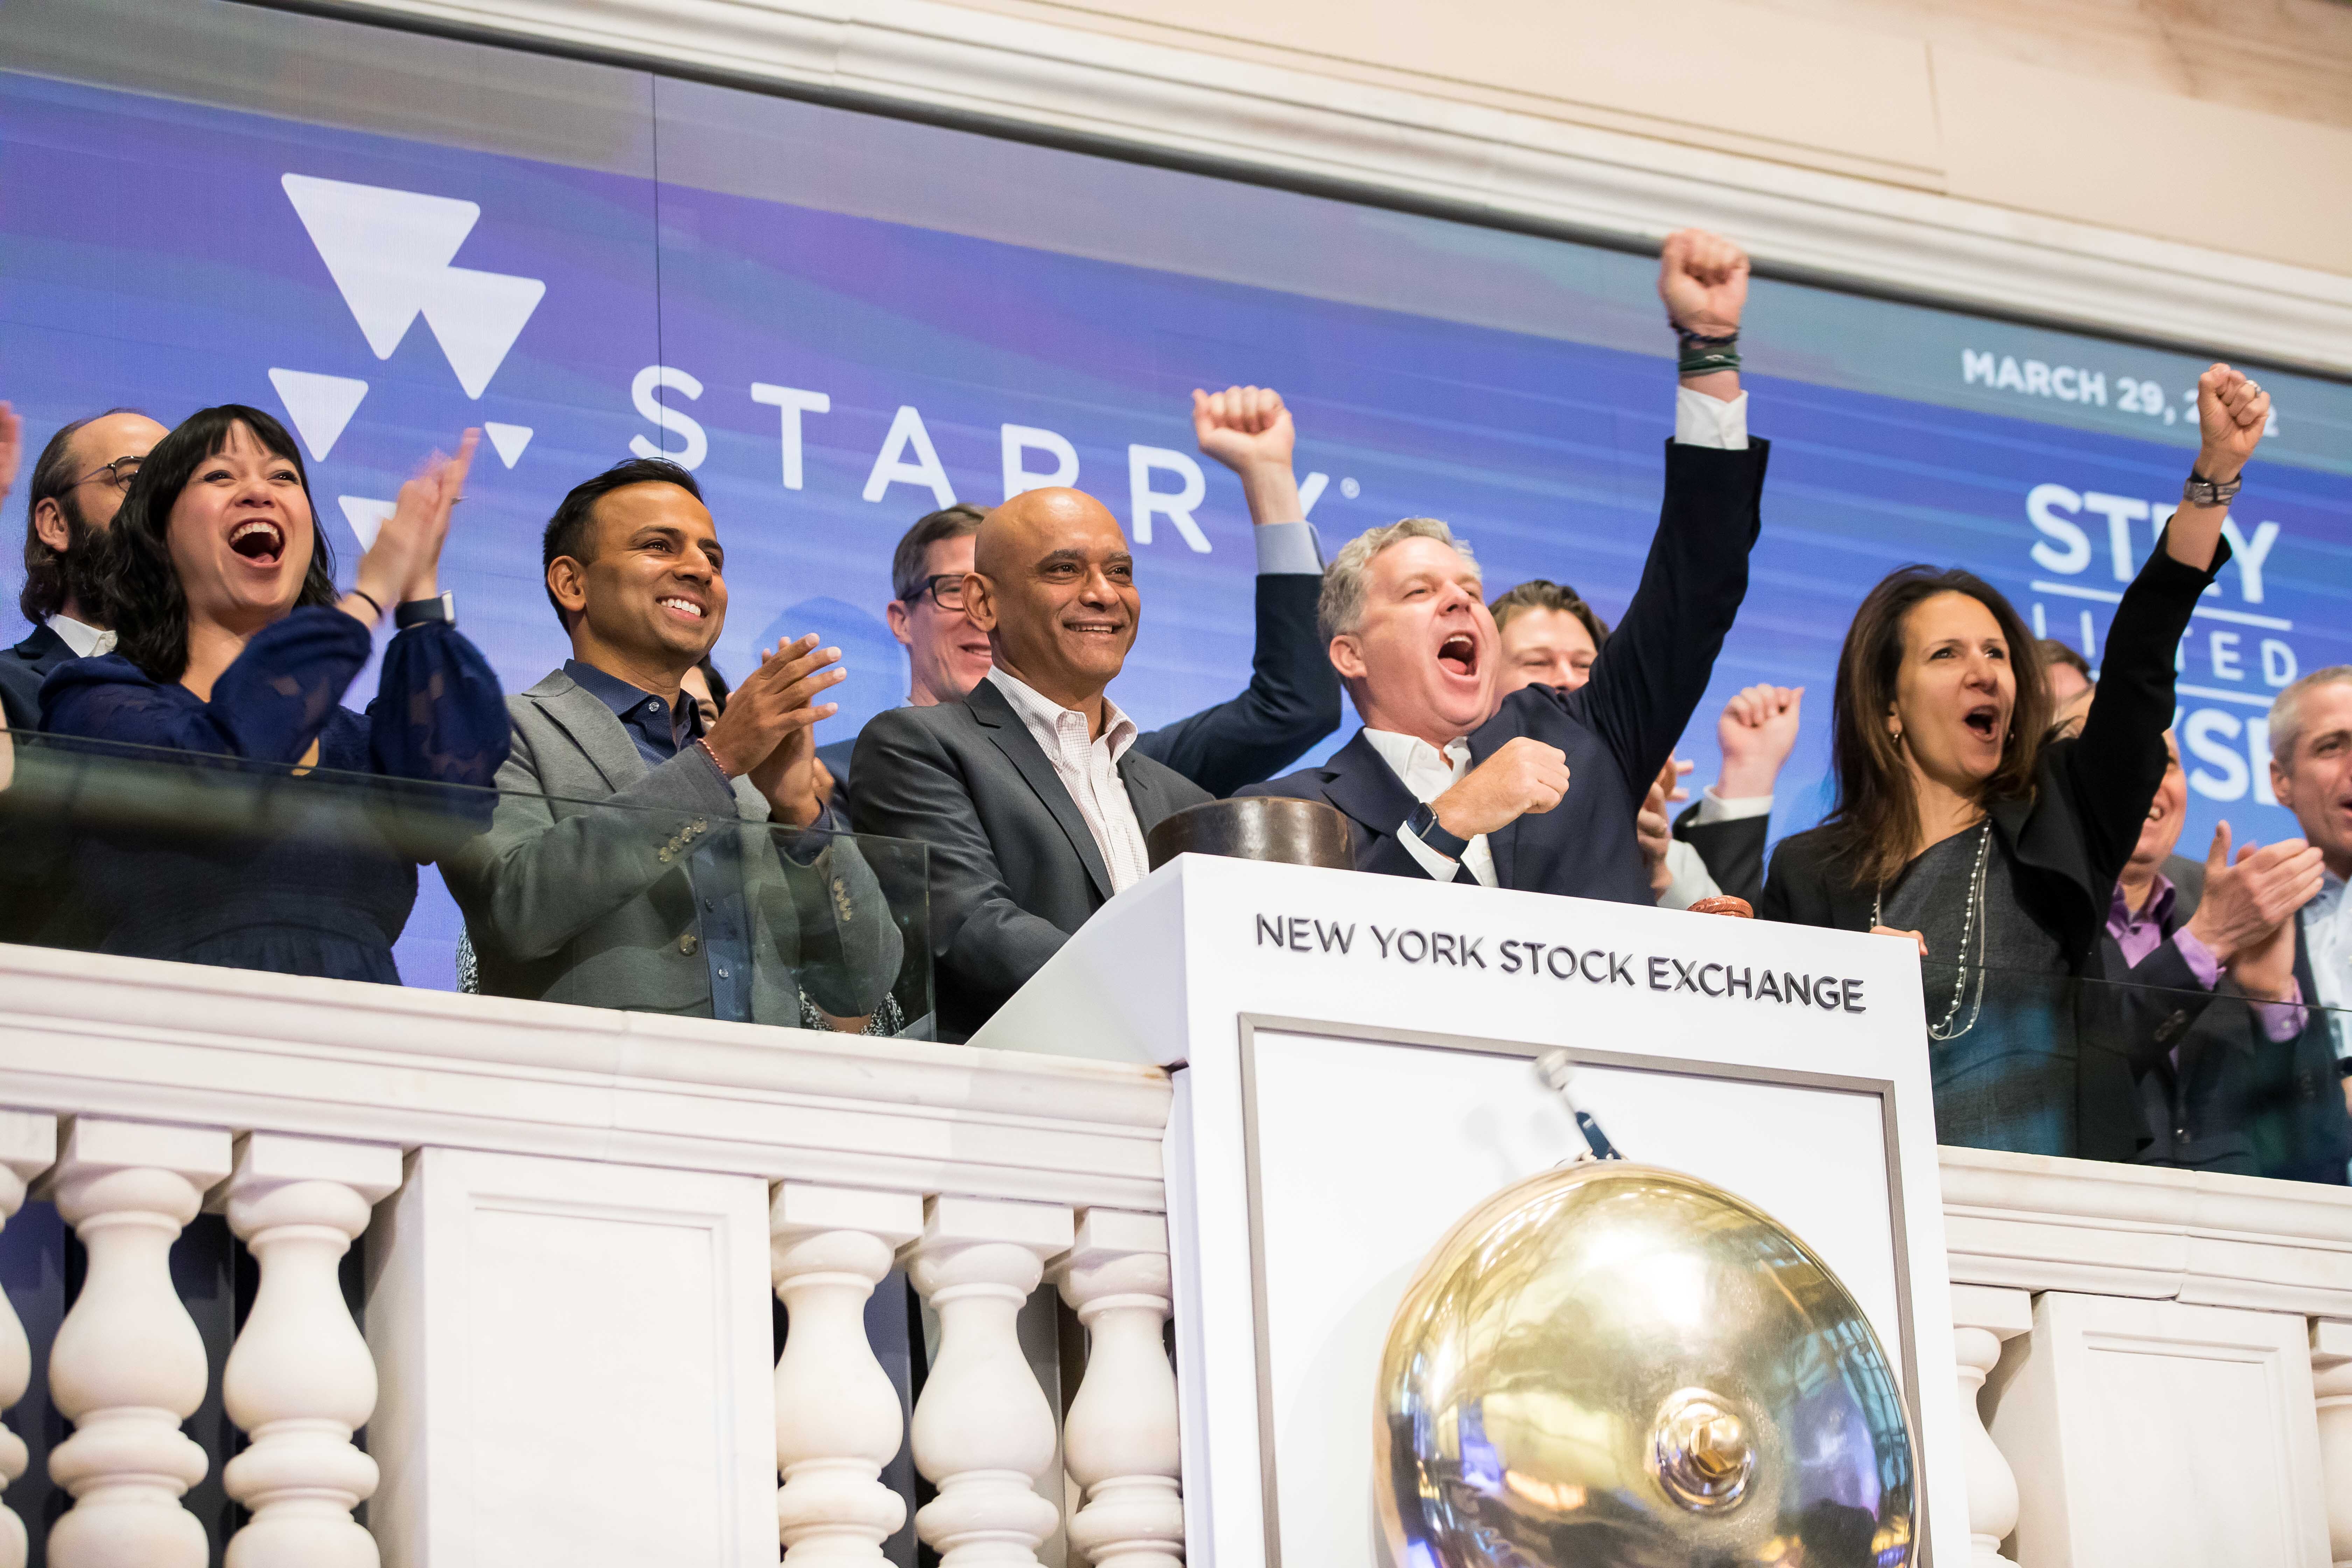 Starry team at New York Stock Exchange